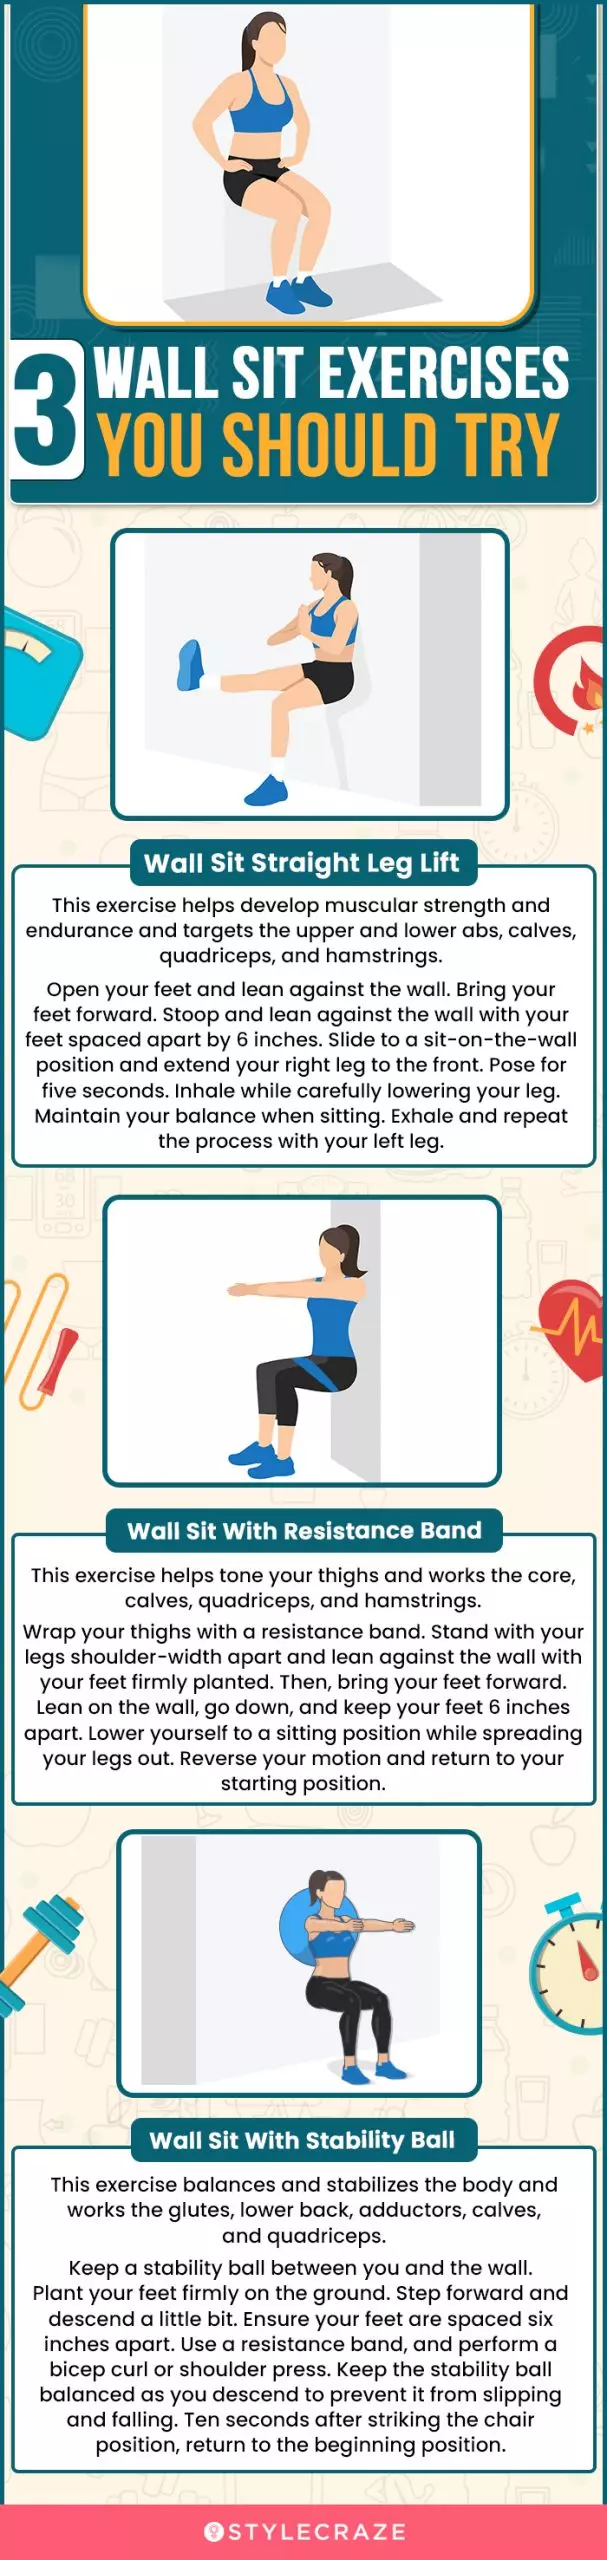 3 wall sit exercises you should try (infographic)